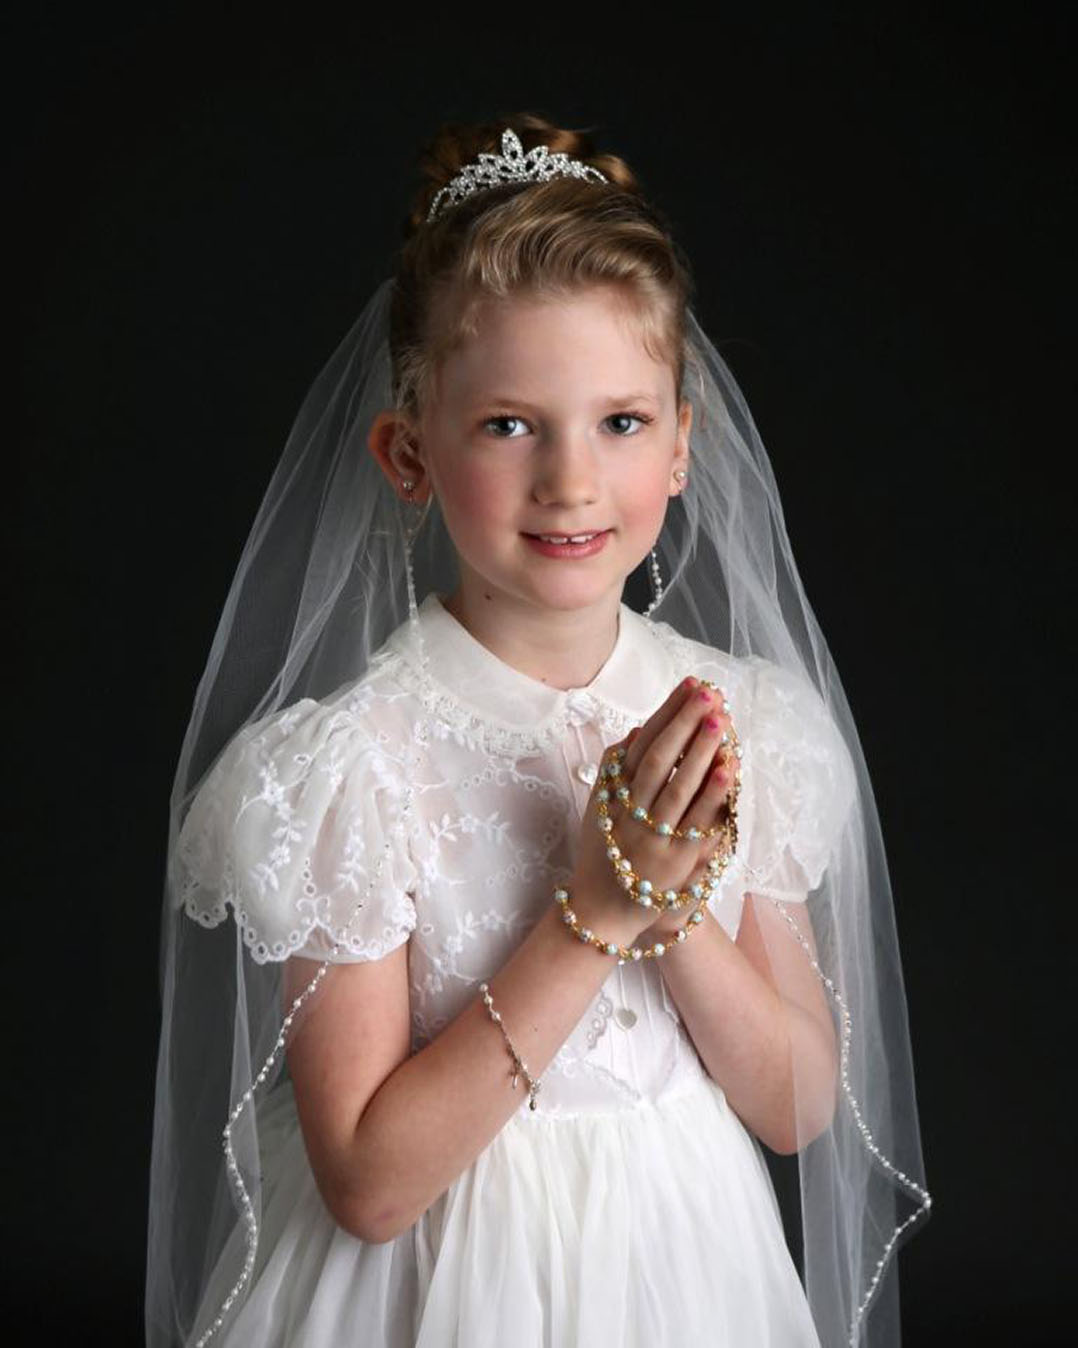 First communion dress becomes family tradition • Current Publishing